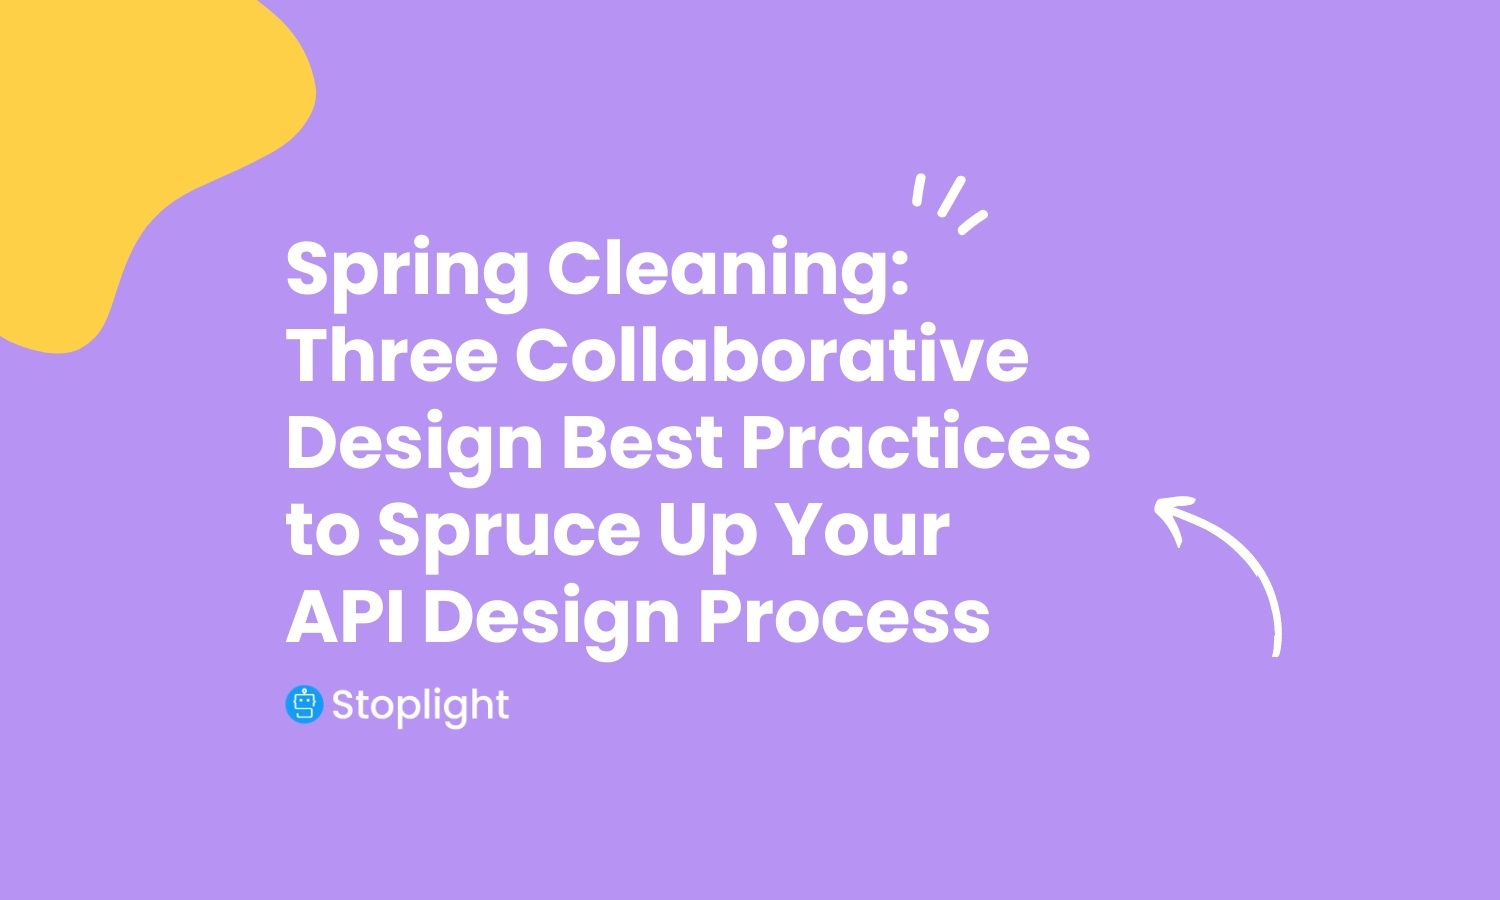 Three Collaborative Design Best Practices to Spruce Up Your API Design Process